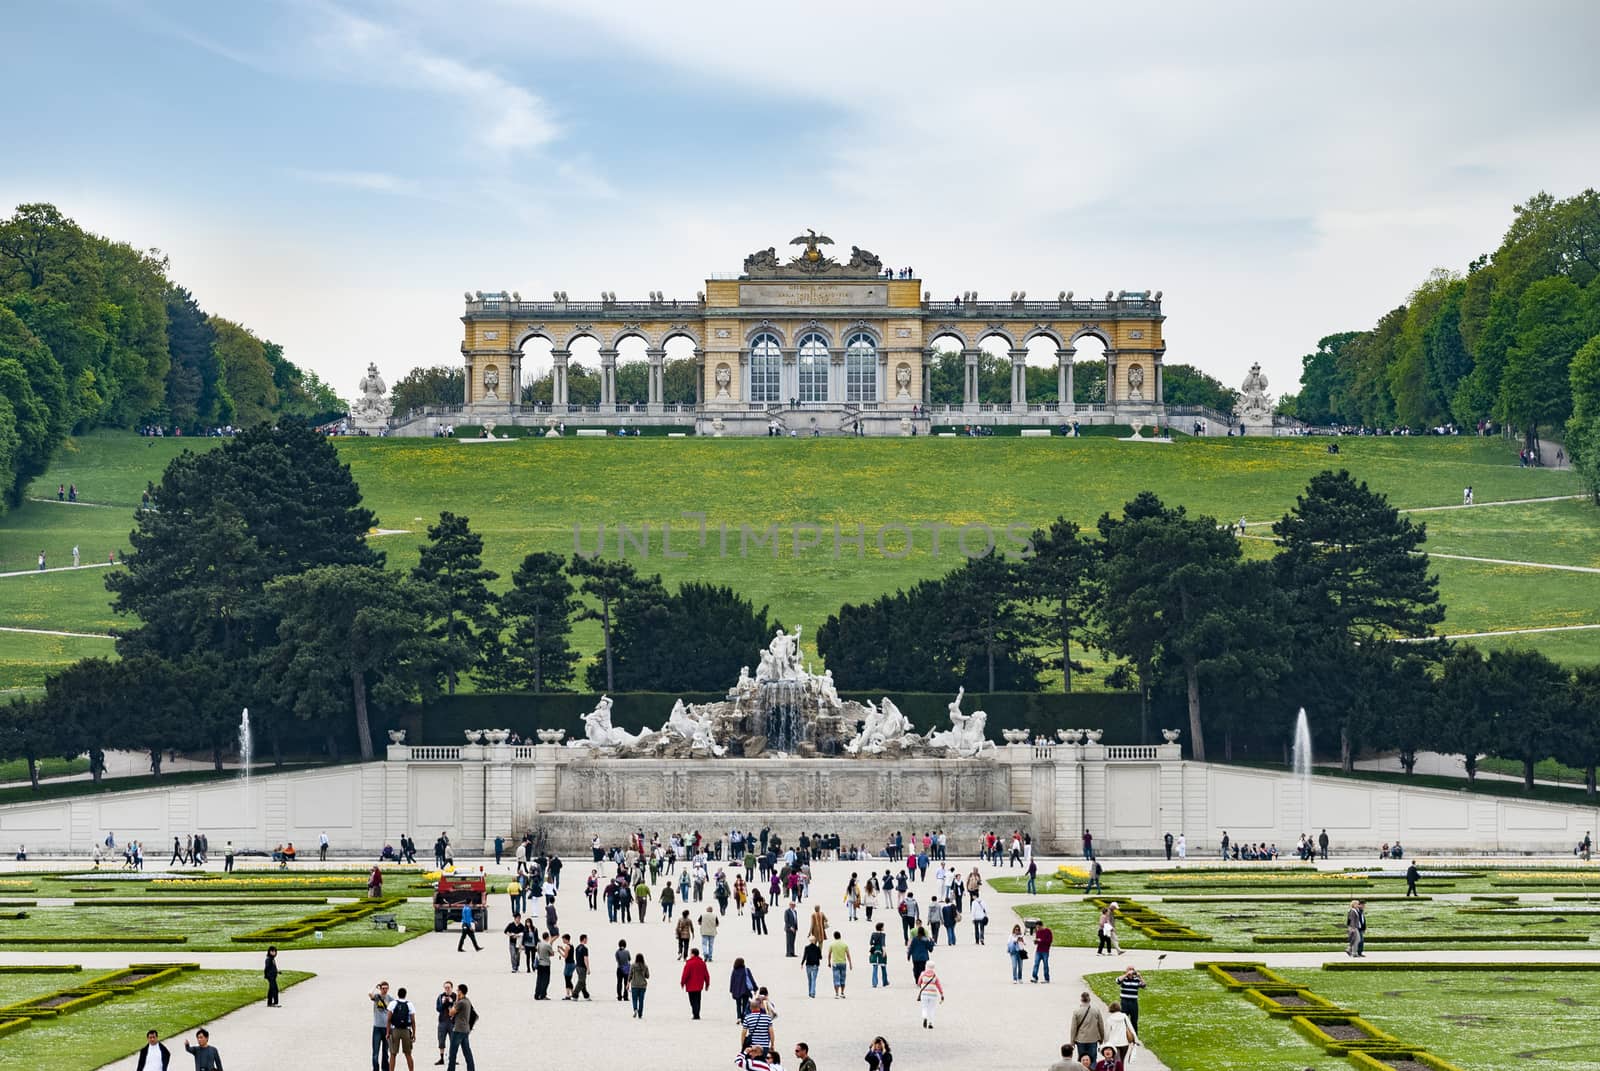 The Gloriette in the Schoenbrunn Palace Garden by whitechild